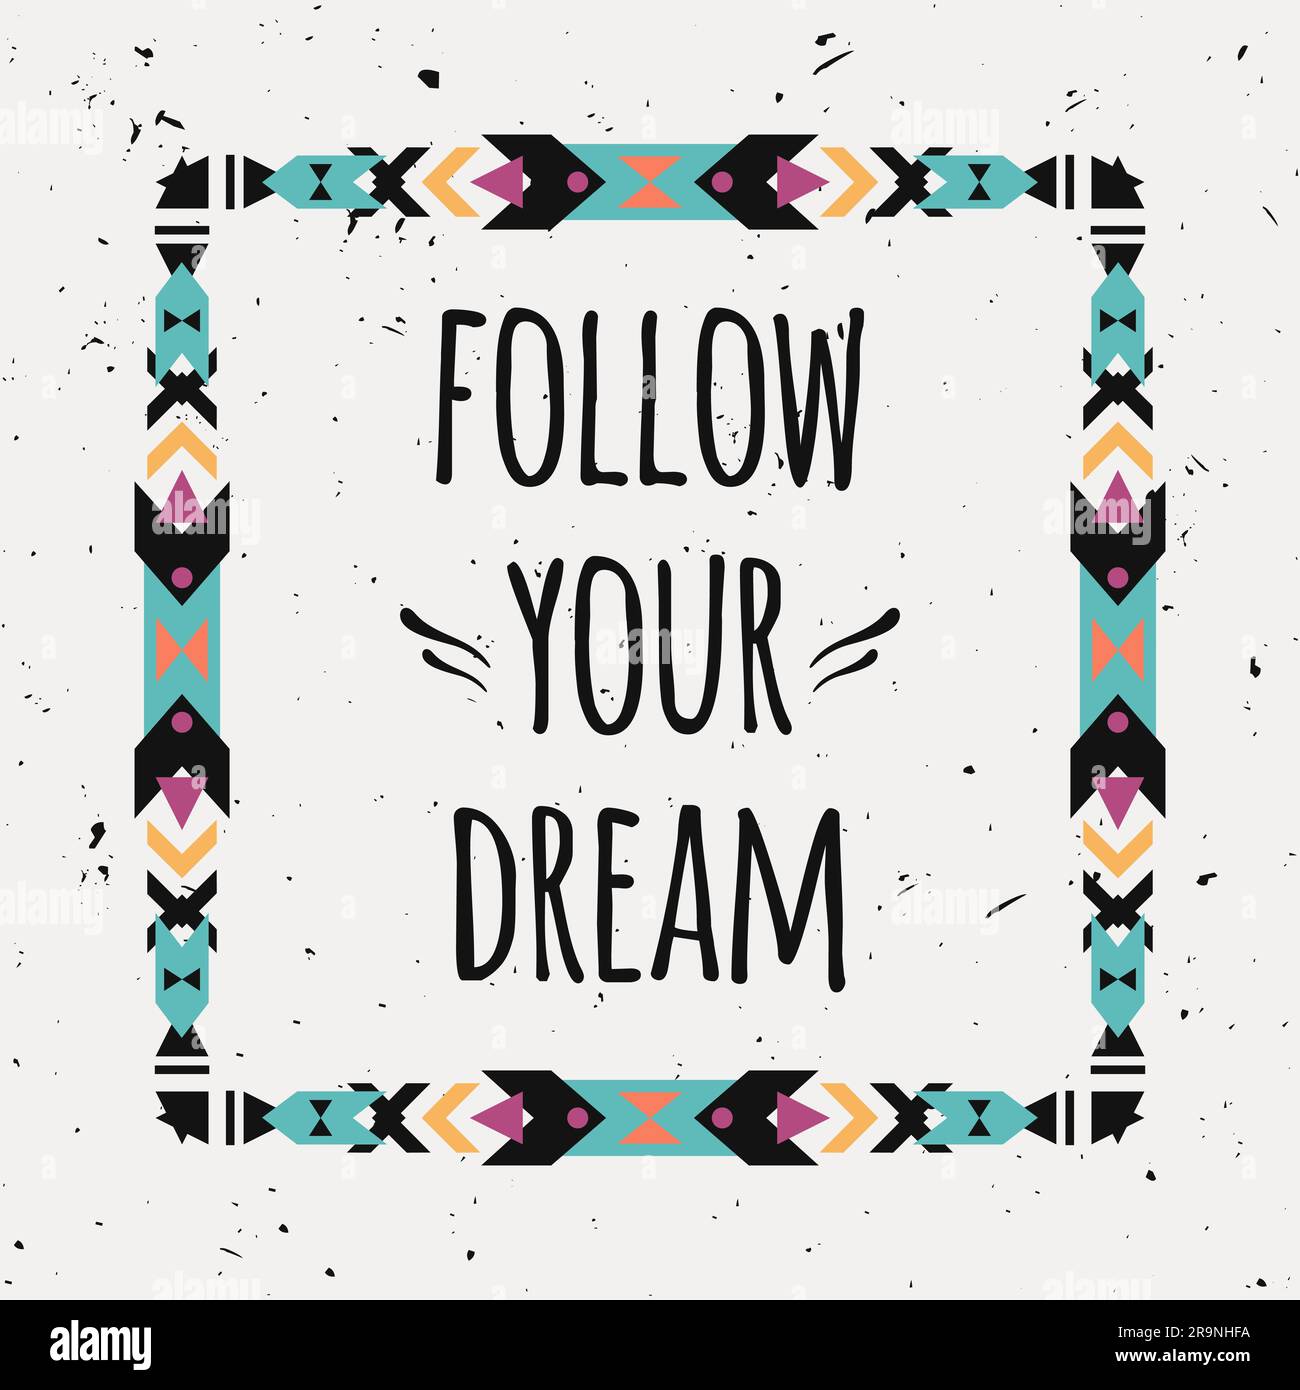 Vector abstract geometric ethnic frame with typographic text 'Follow your dream'. Poster with tribal graphic design elements. Boho style. American ind Stock Vector